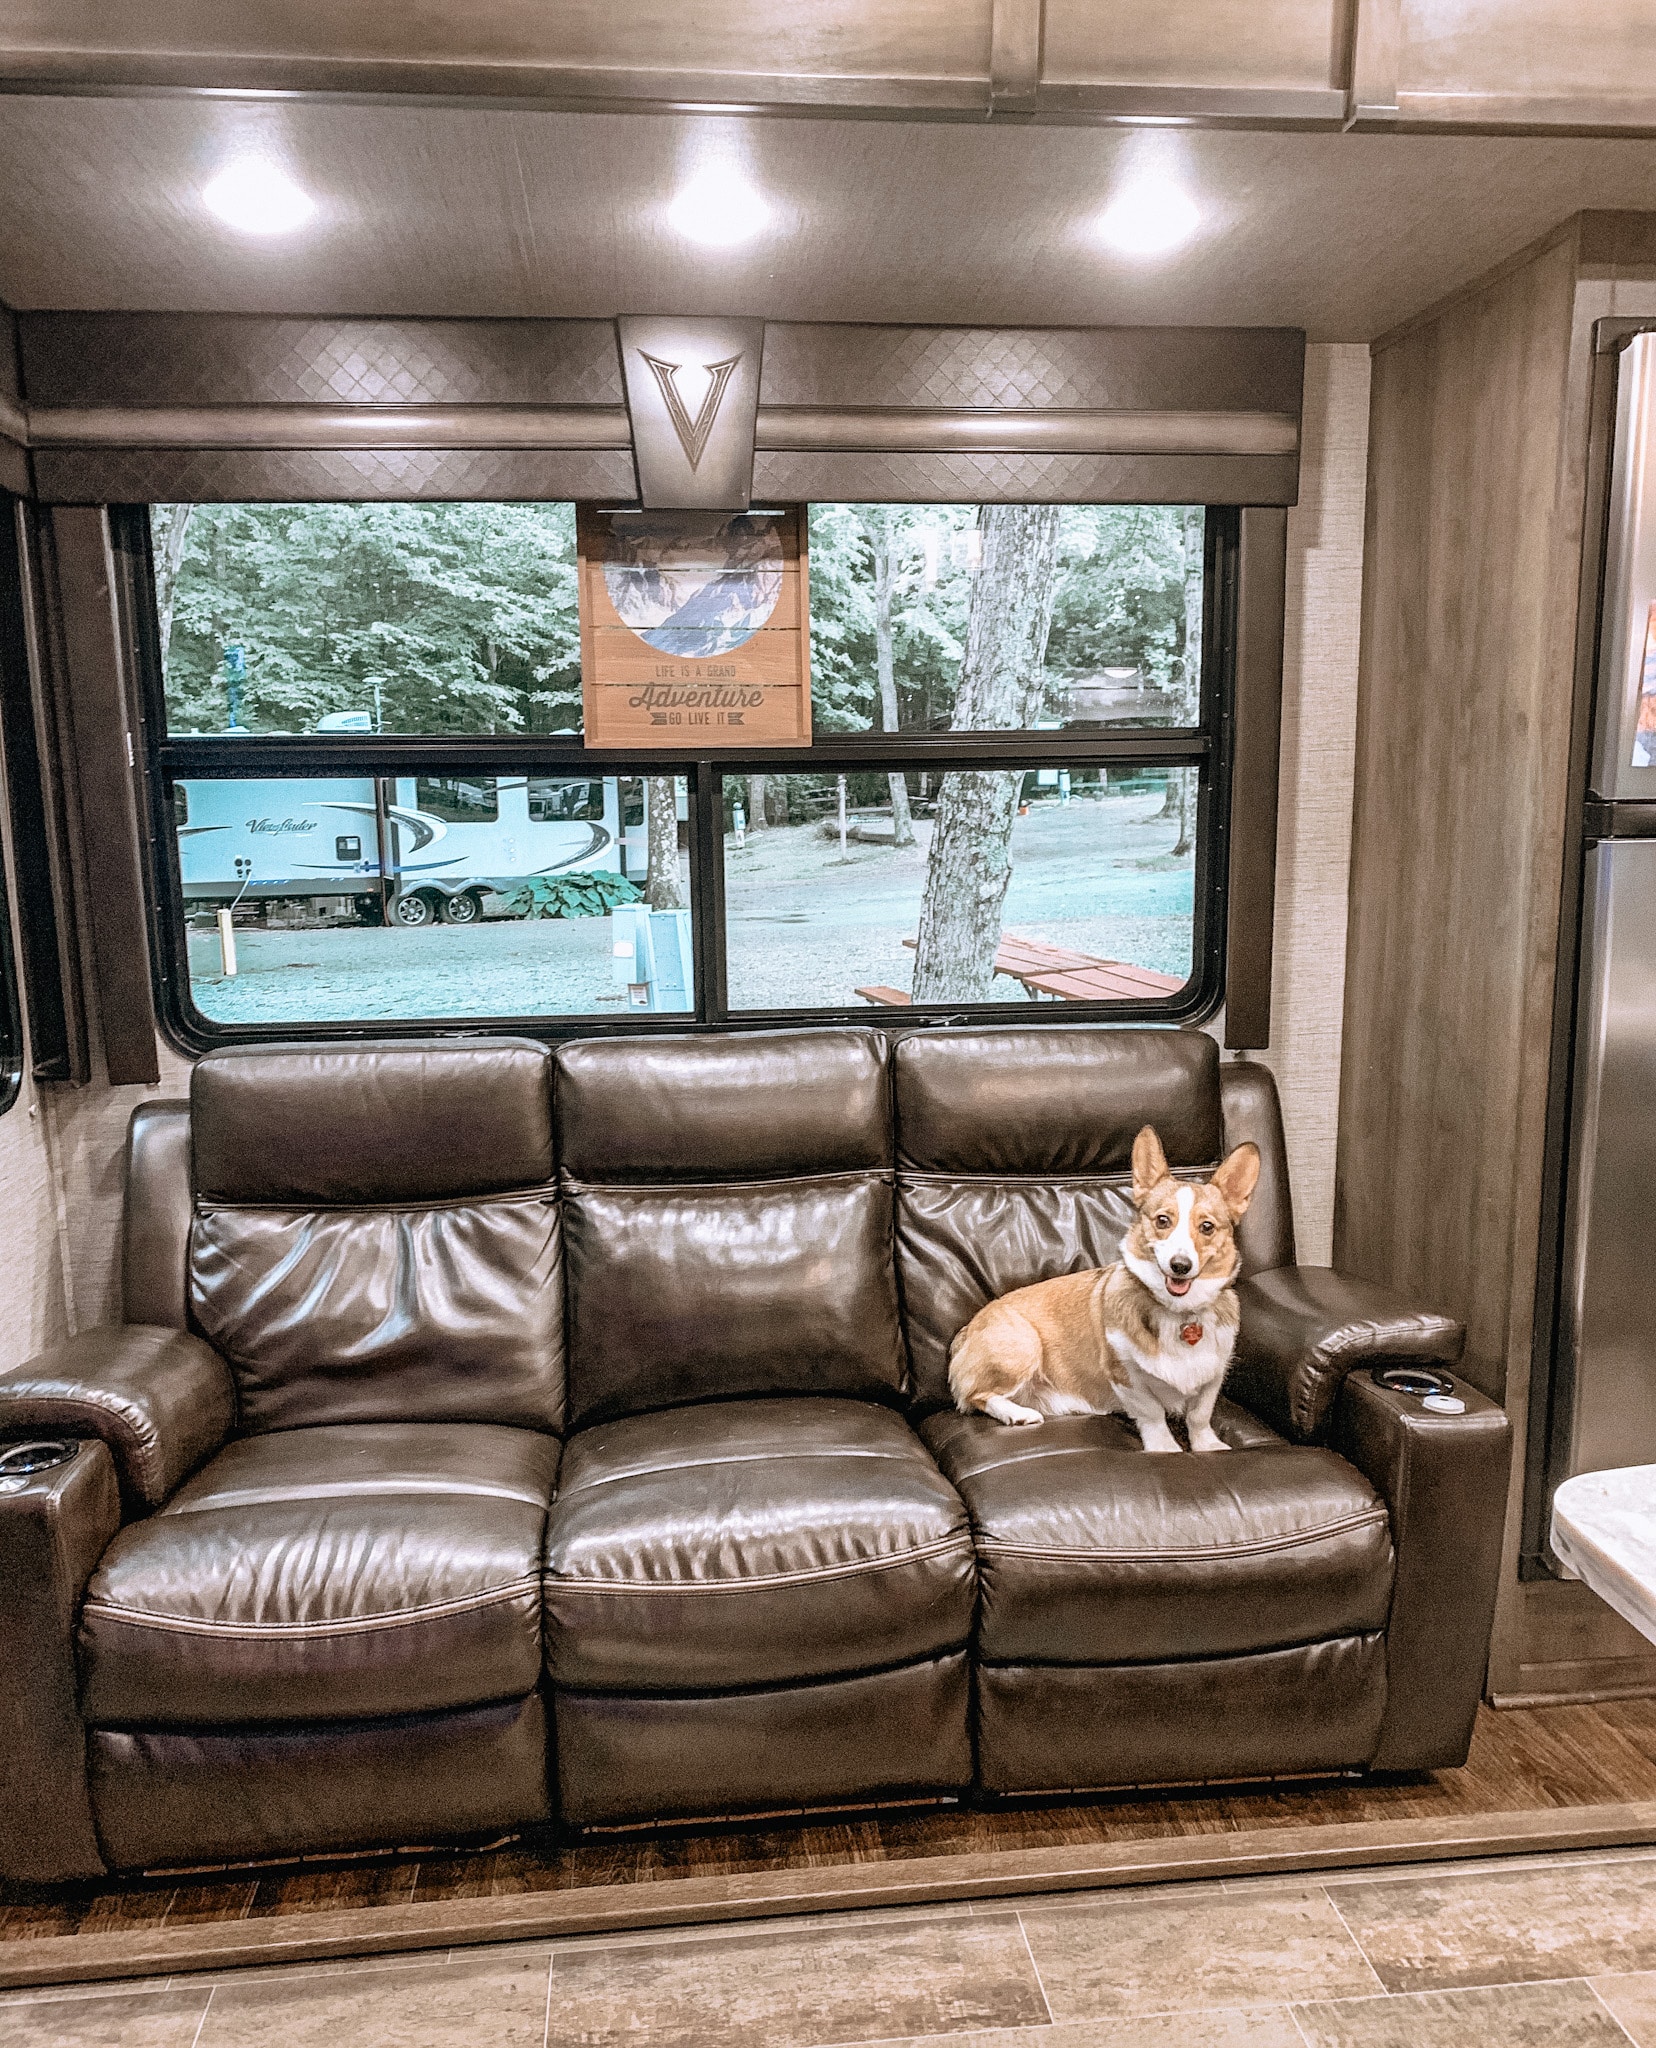 dog sitting on couch in rv